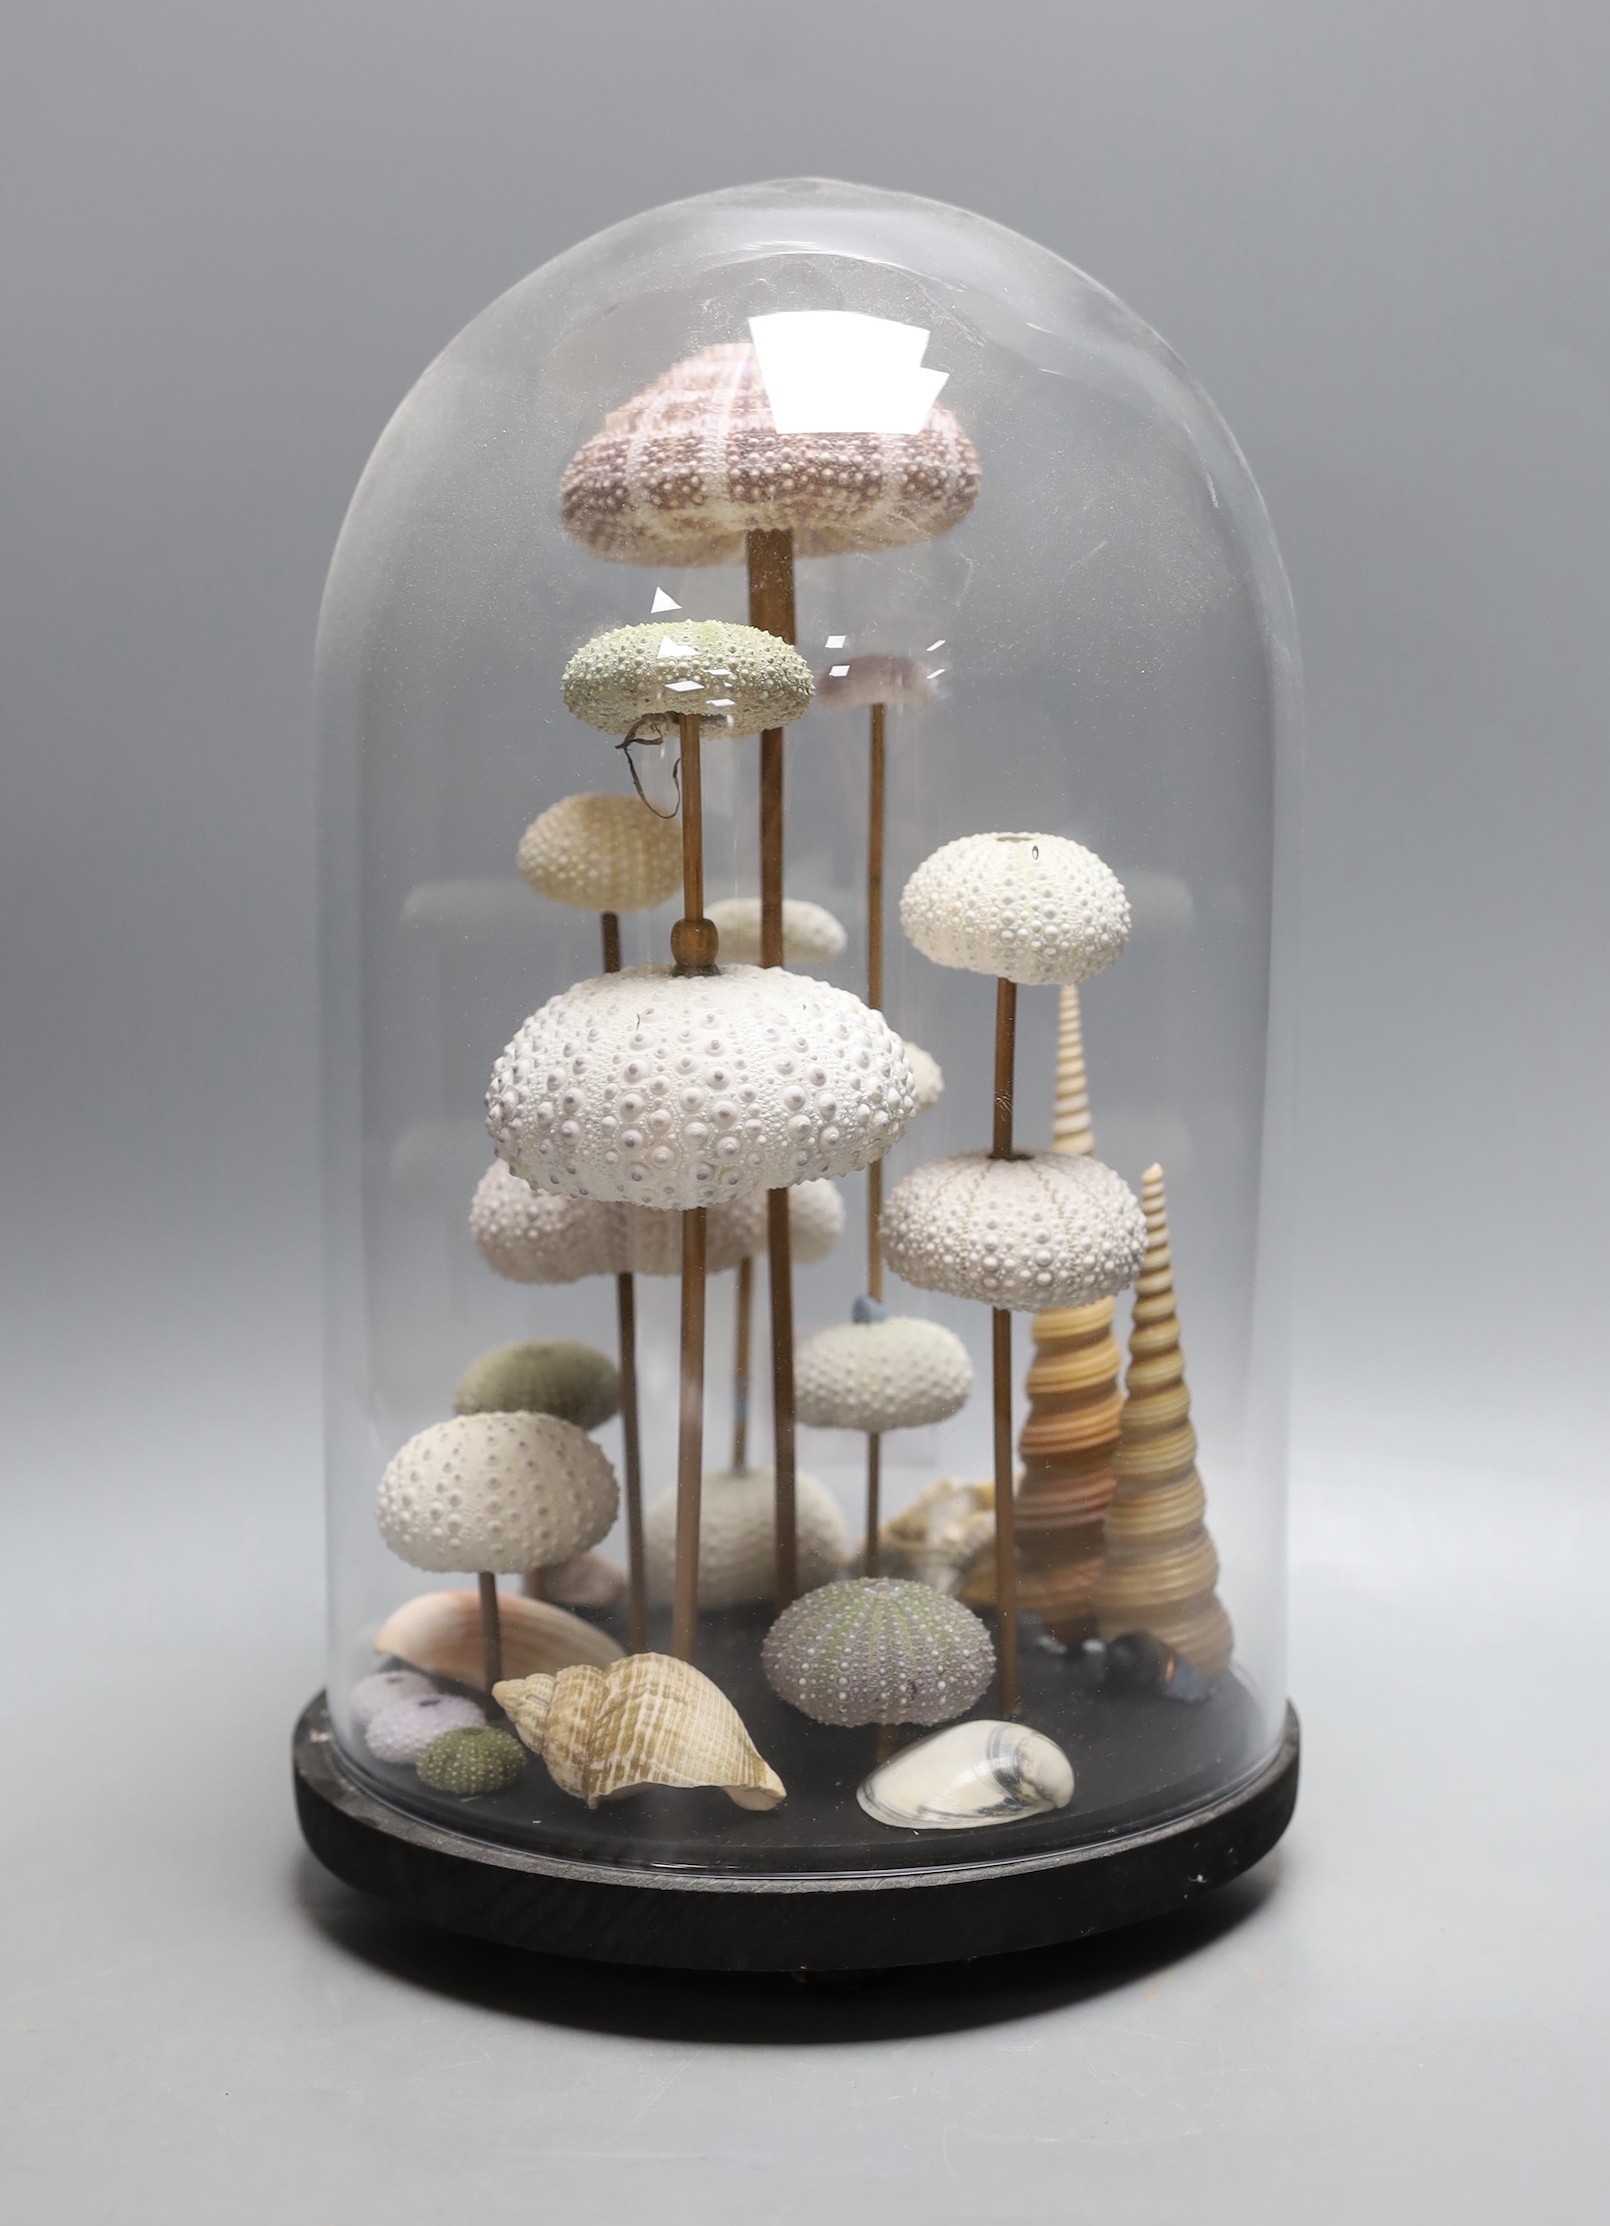 A display of sea urchin and shell specimens, under a glass dome, 33 cm high